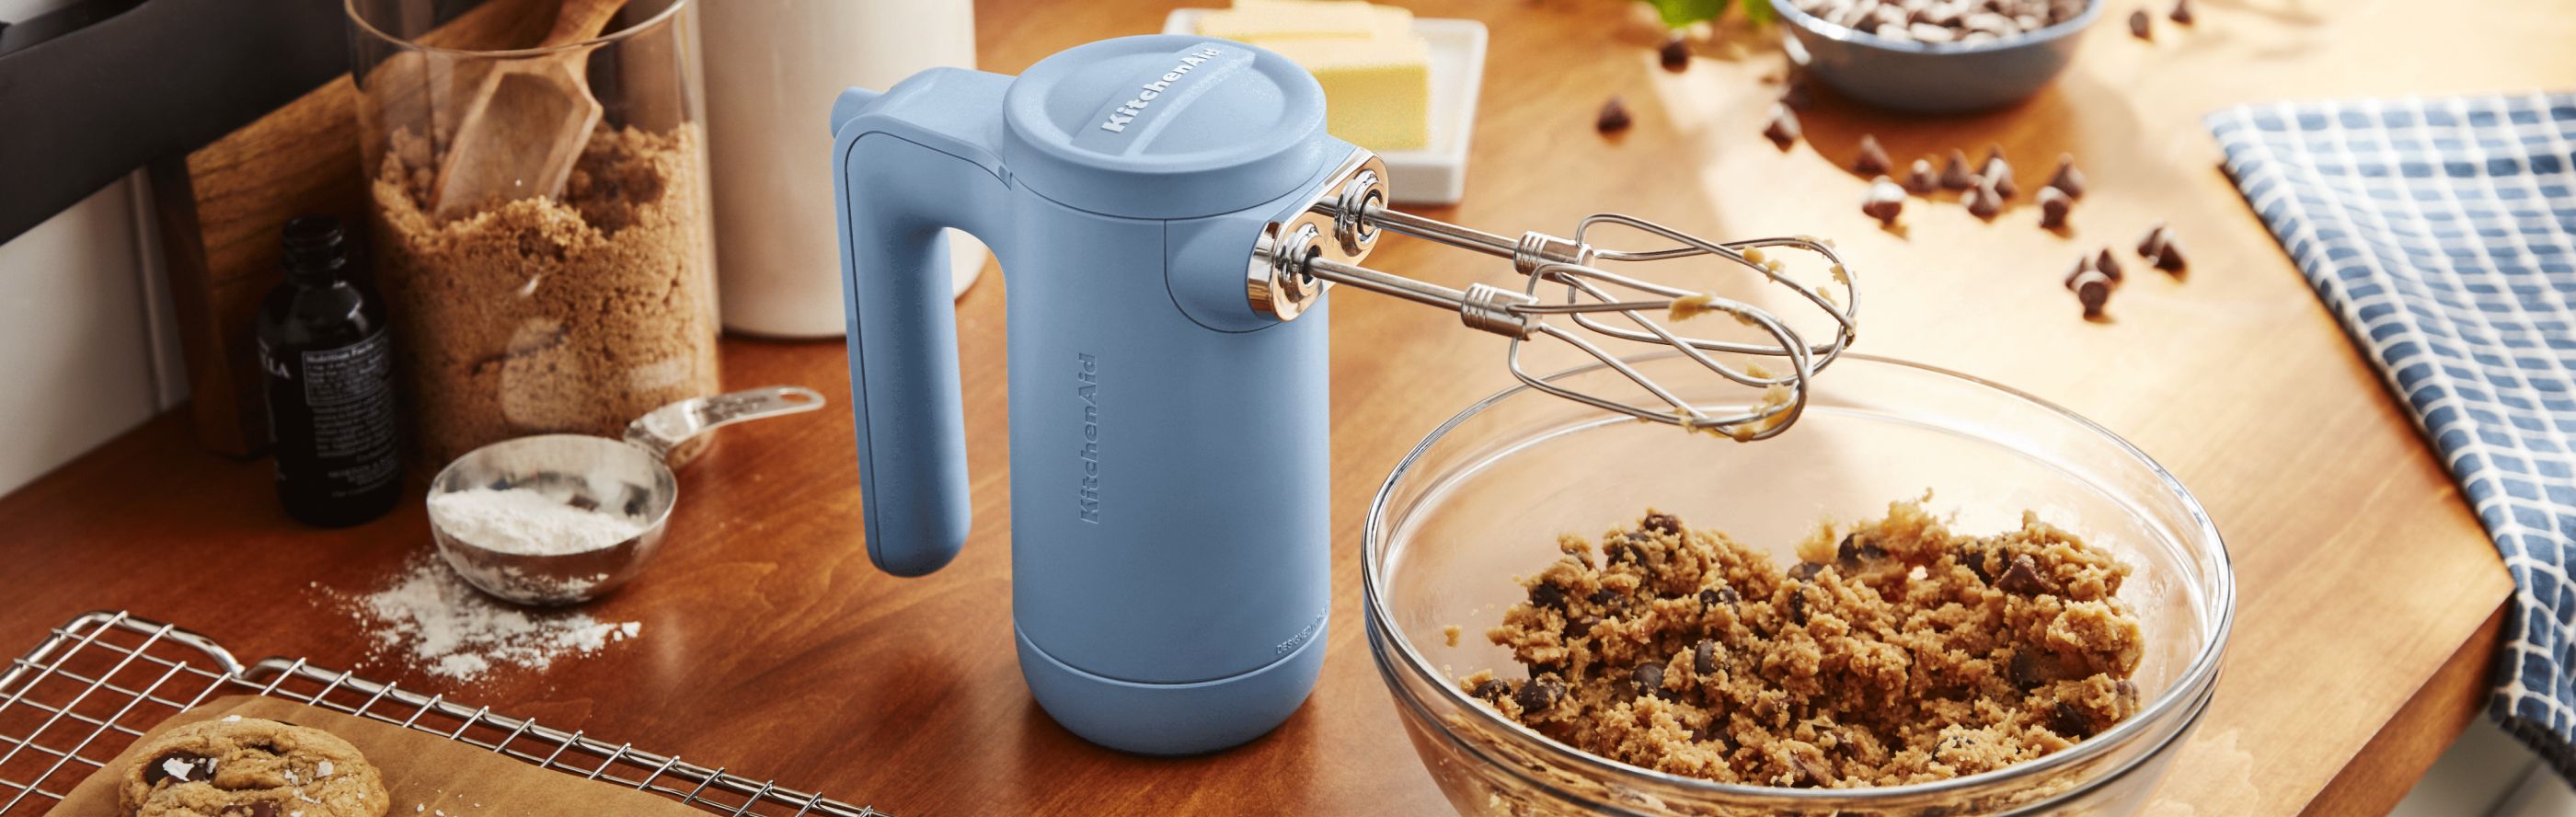 Blue KitchenAid® hand mixer on countertop next to bowl of chocolate chip cookie dough